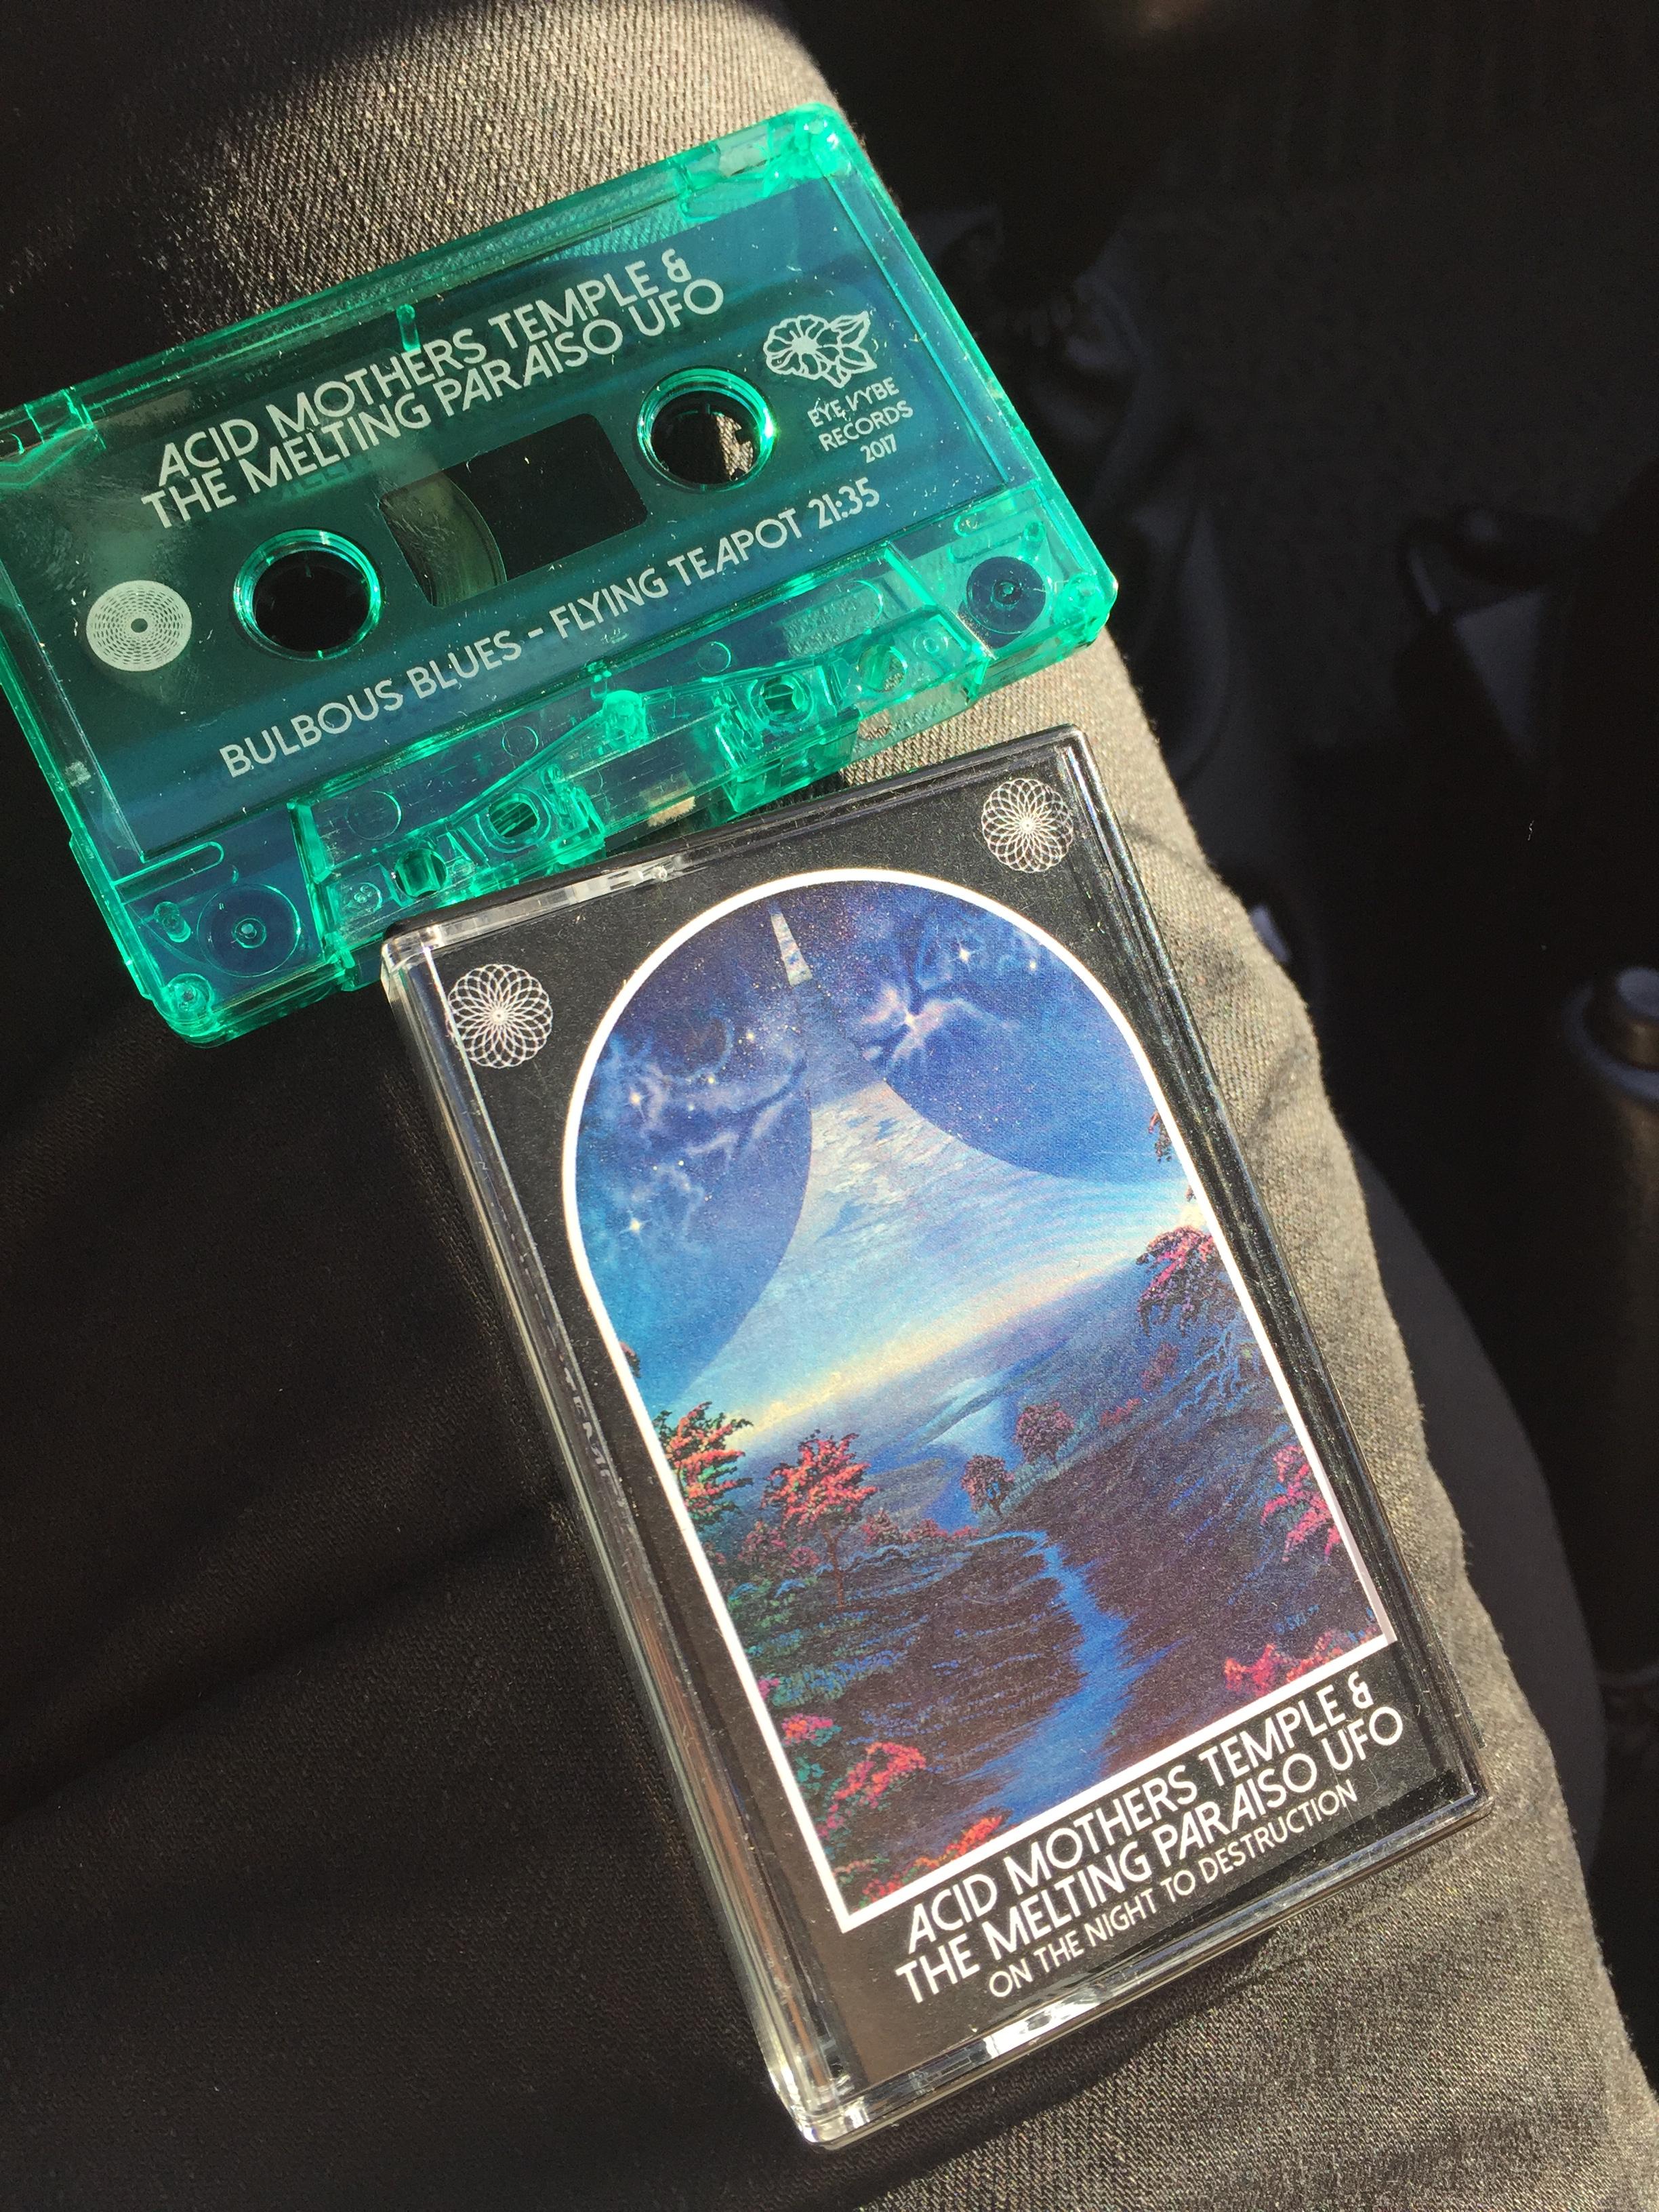 To the guy who posted the Halo-like painting from 1979, I got the same  design on a psychedellic rock cassette